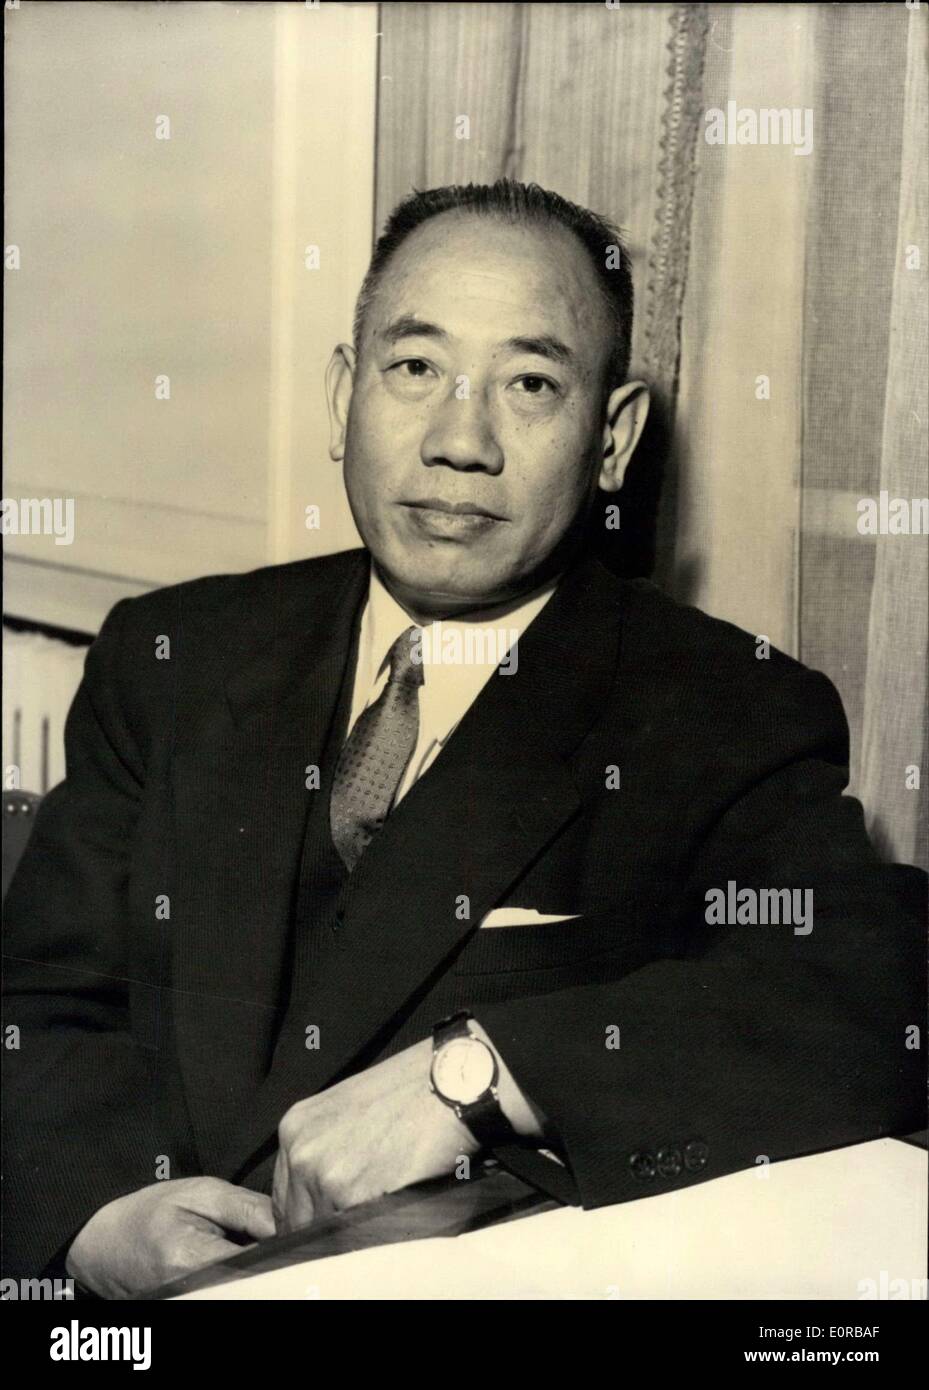 Nov. 17, 1958 - National China high Official in Paris: M.Huang Shao Ku, Chang Kai Shek's Foreign Minister arrived yesterday in Paris. He met M. Couve de Murville today, and is expected to be reveived by General de Gaulle later in the day. Photo shows M.Huang Shao Ku photographed at his hotel. Stock Photo